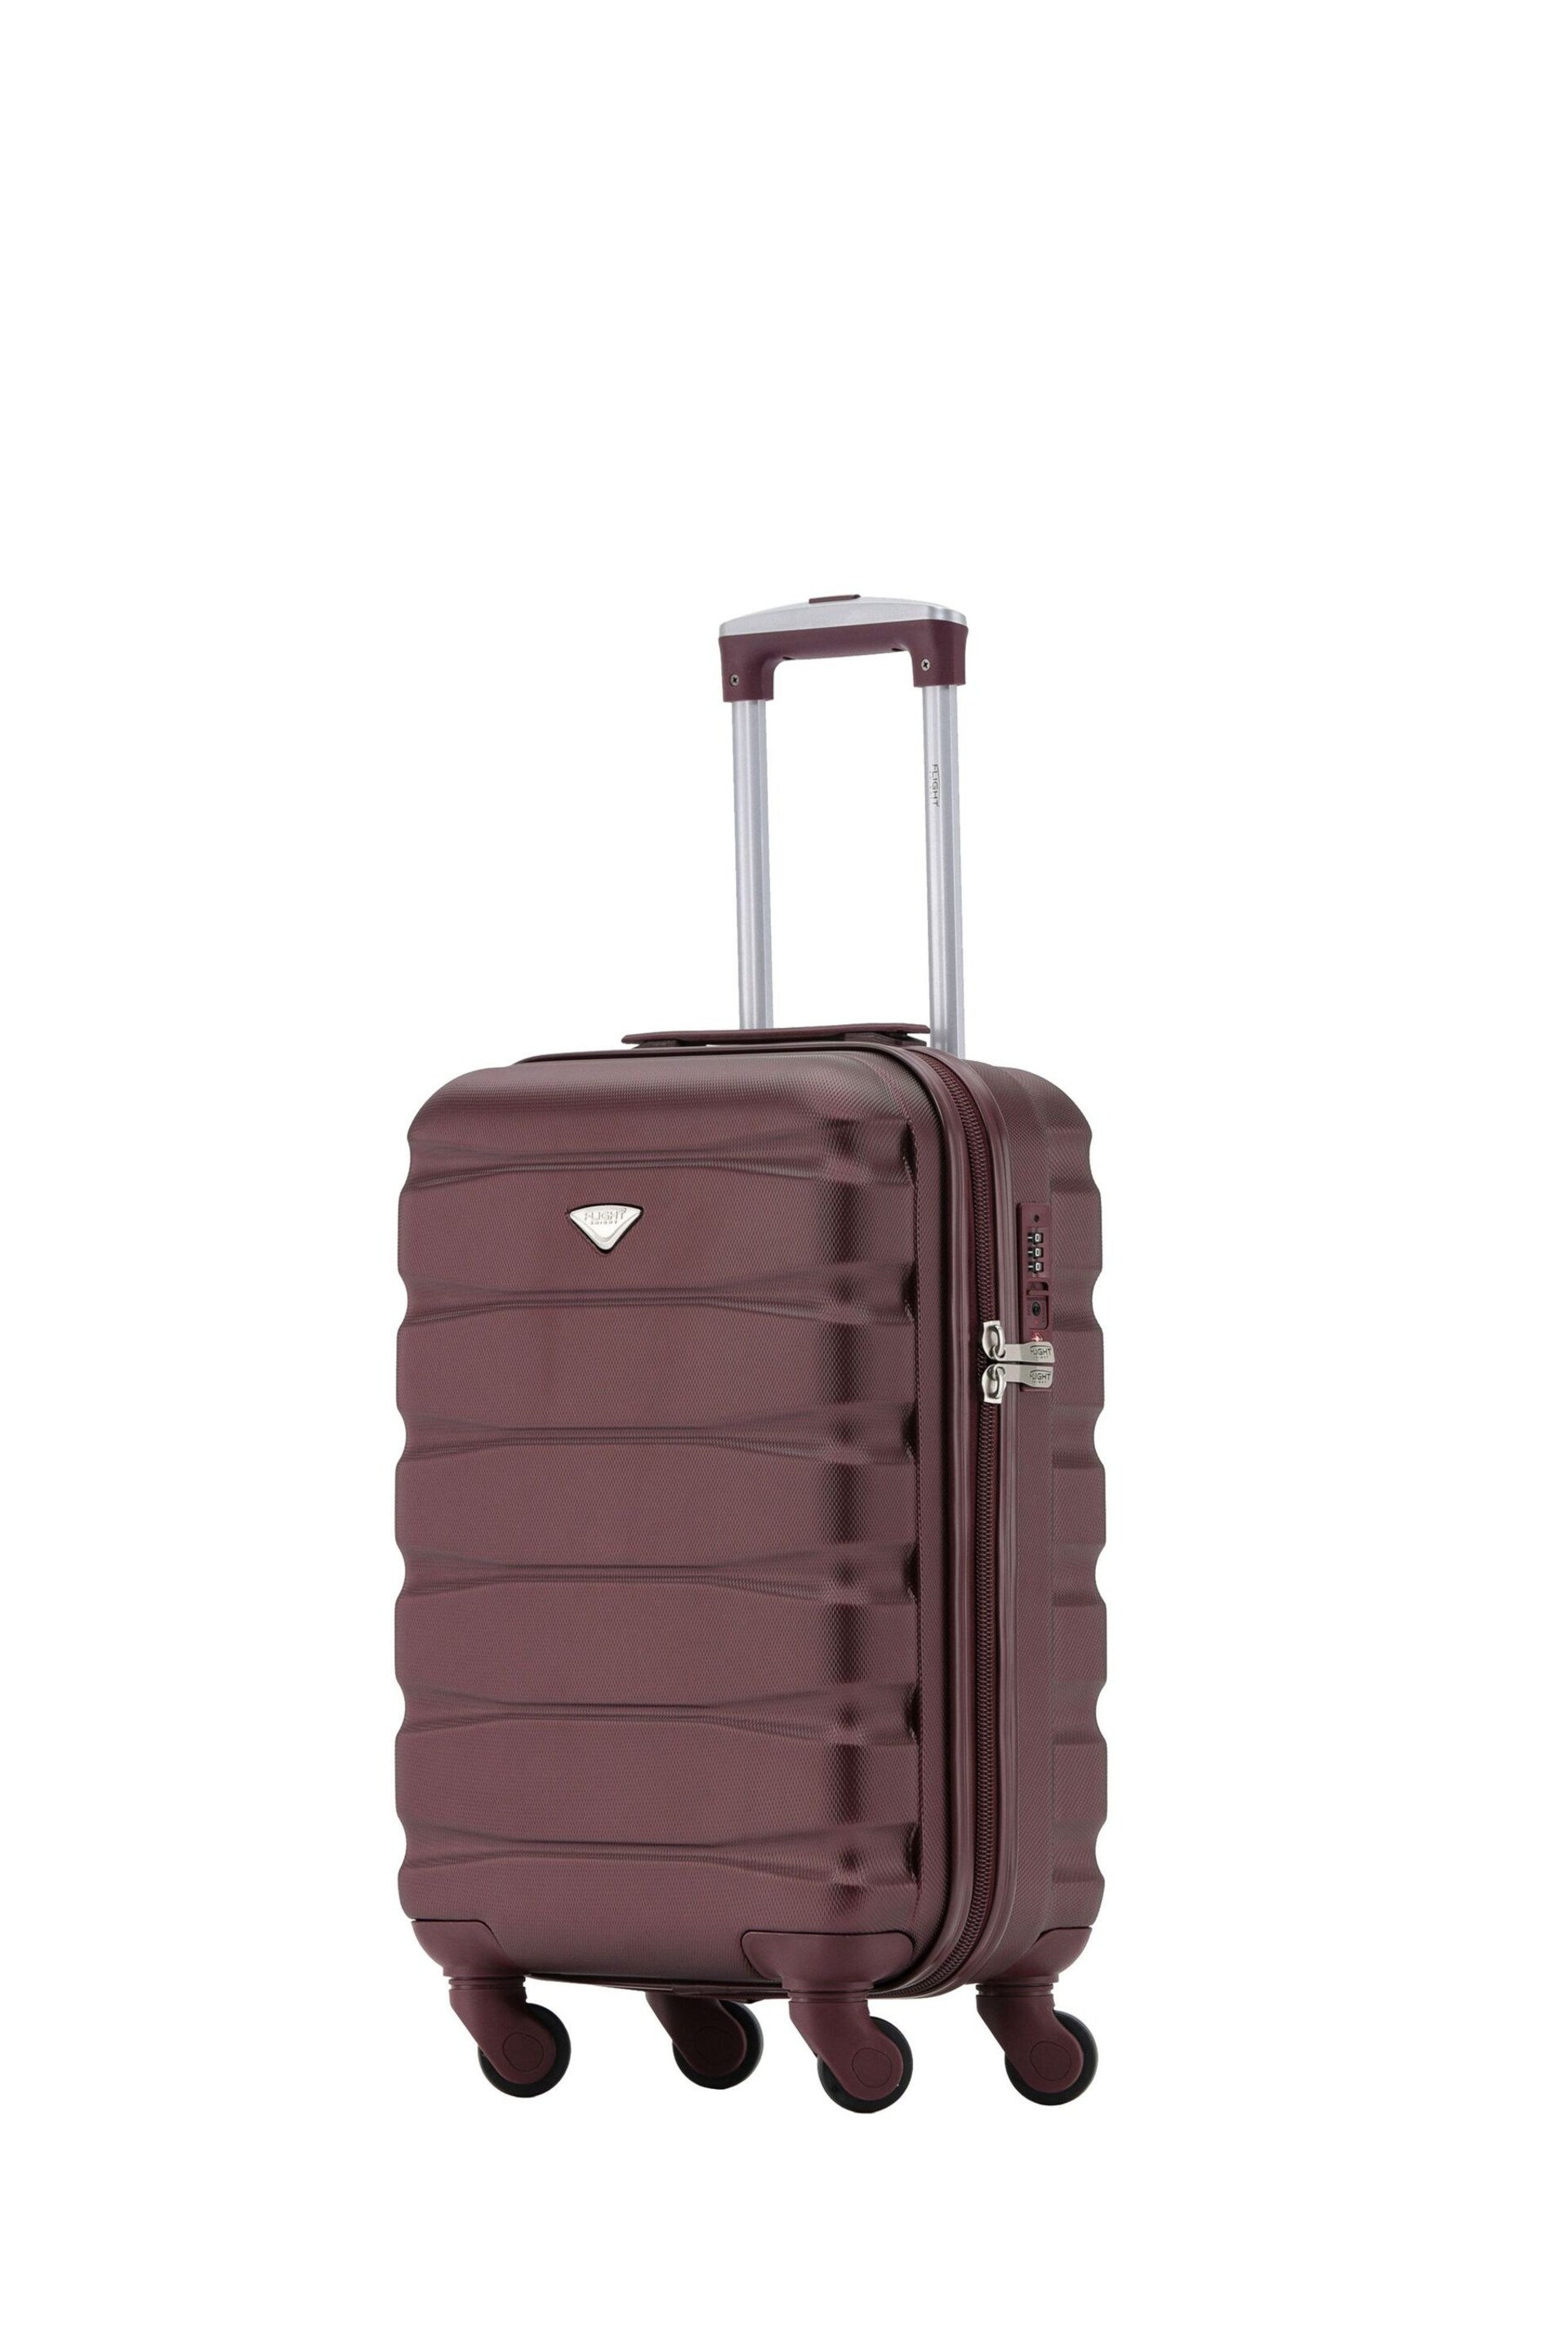 Flight Knight 55x35x20cm 4 Wheel ABS Hard Case Cabin Carry On Hand Luggage - Image 1 of 7